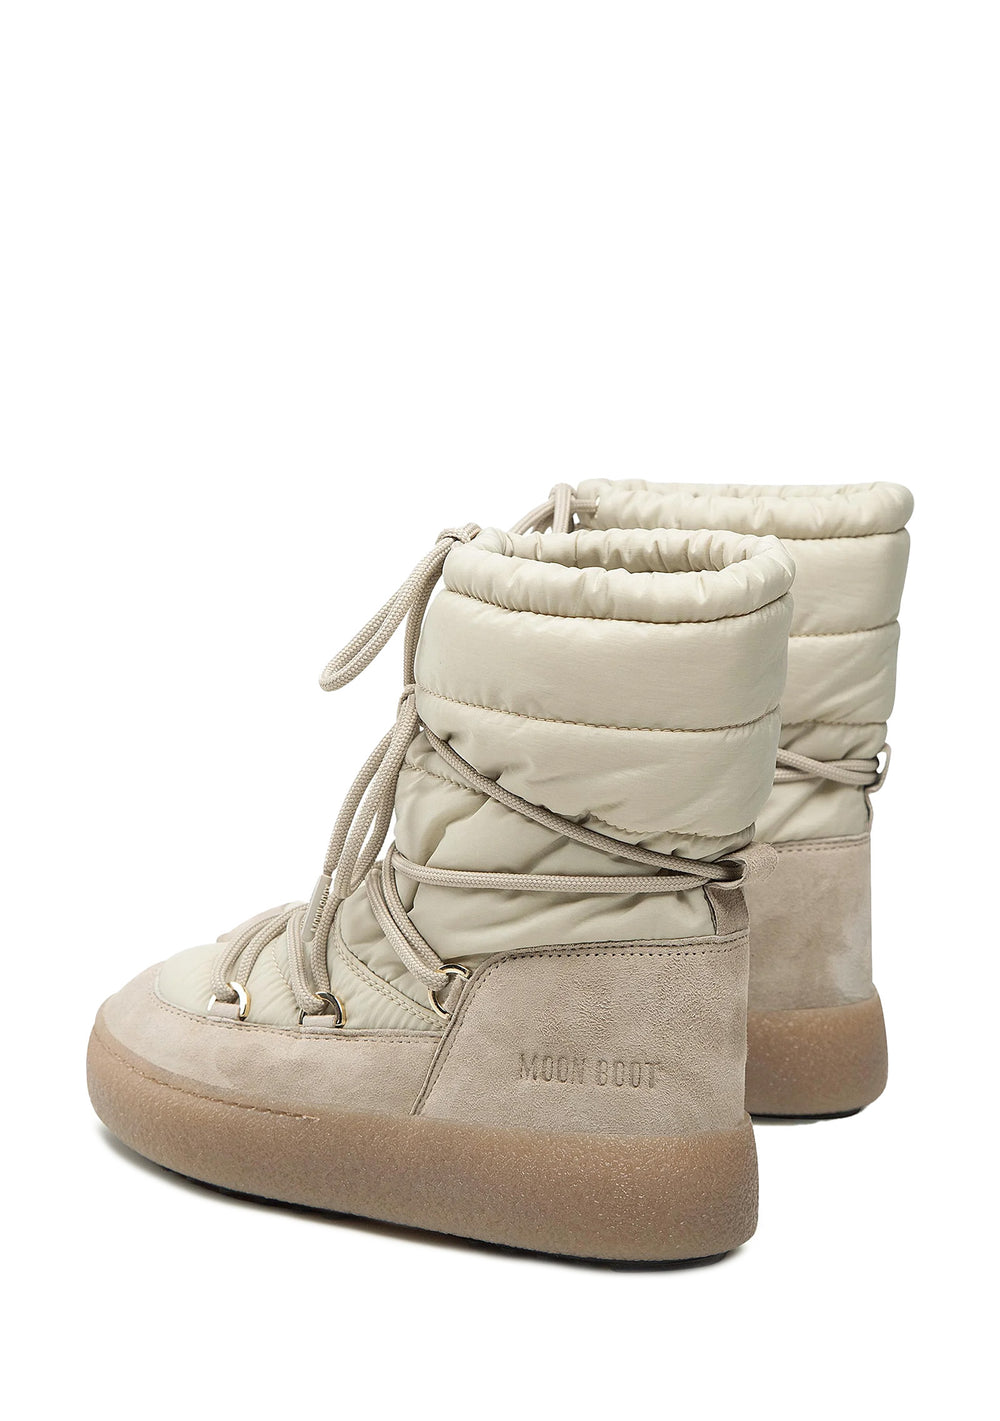 STIVALE DONNA Sand Moon Boot